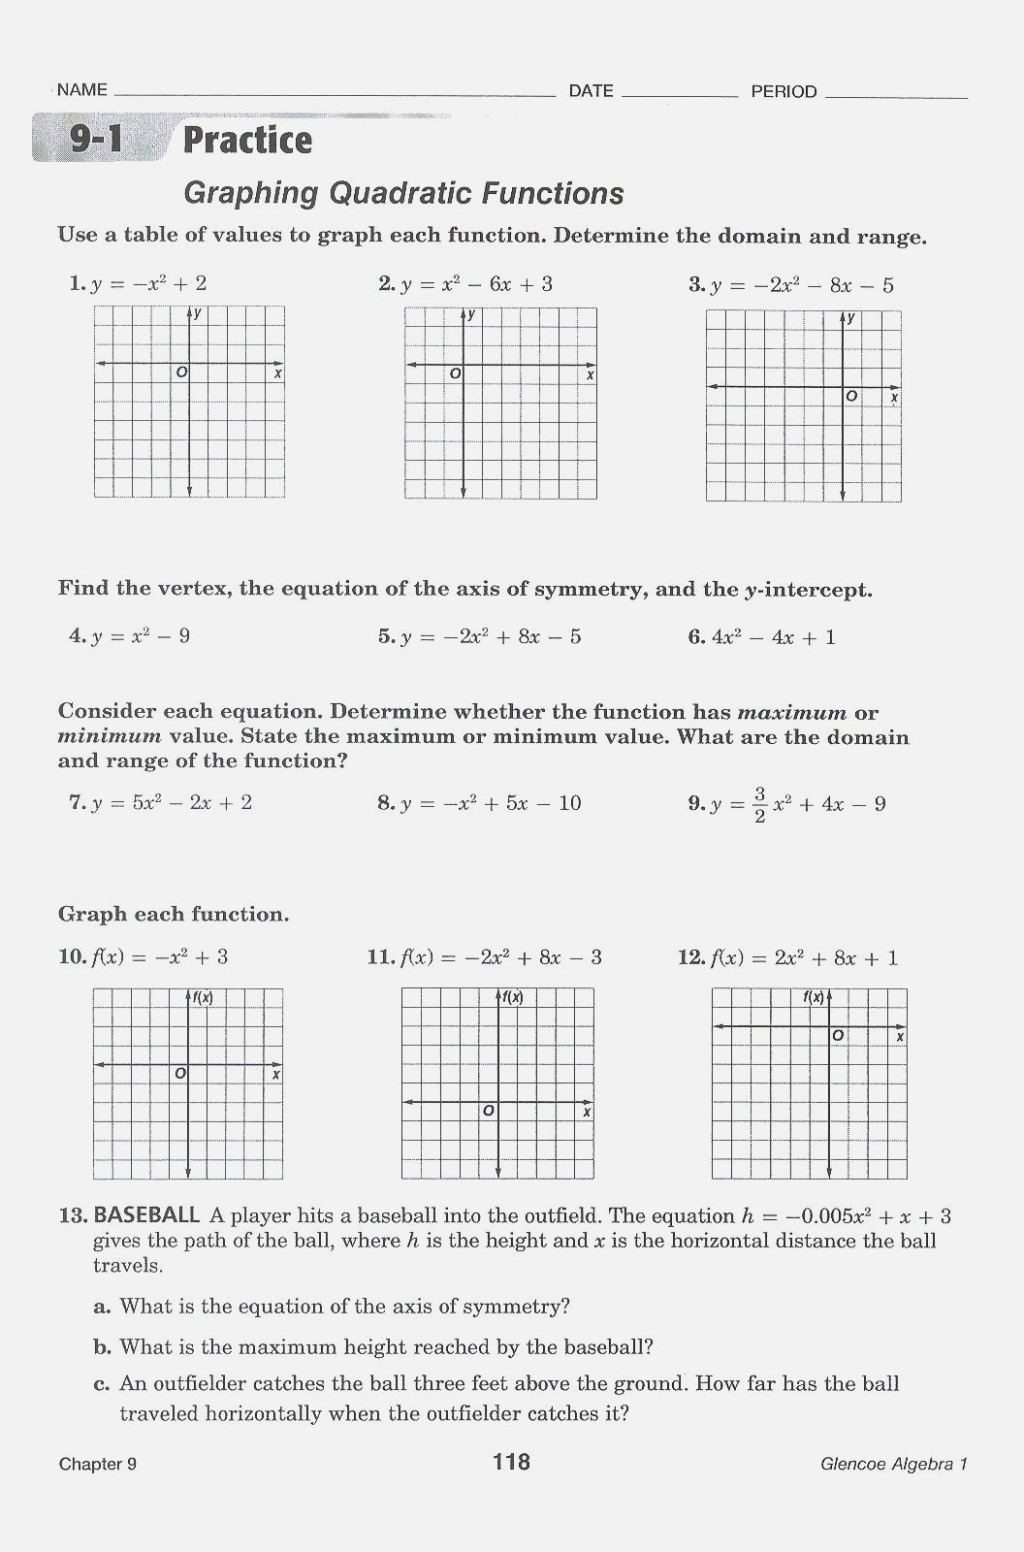 graphing-quadratic-functions-in-standard-form-worksheet-1-answer-key